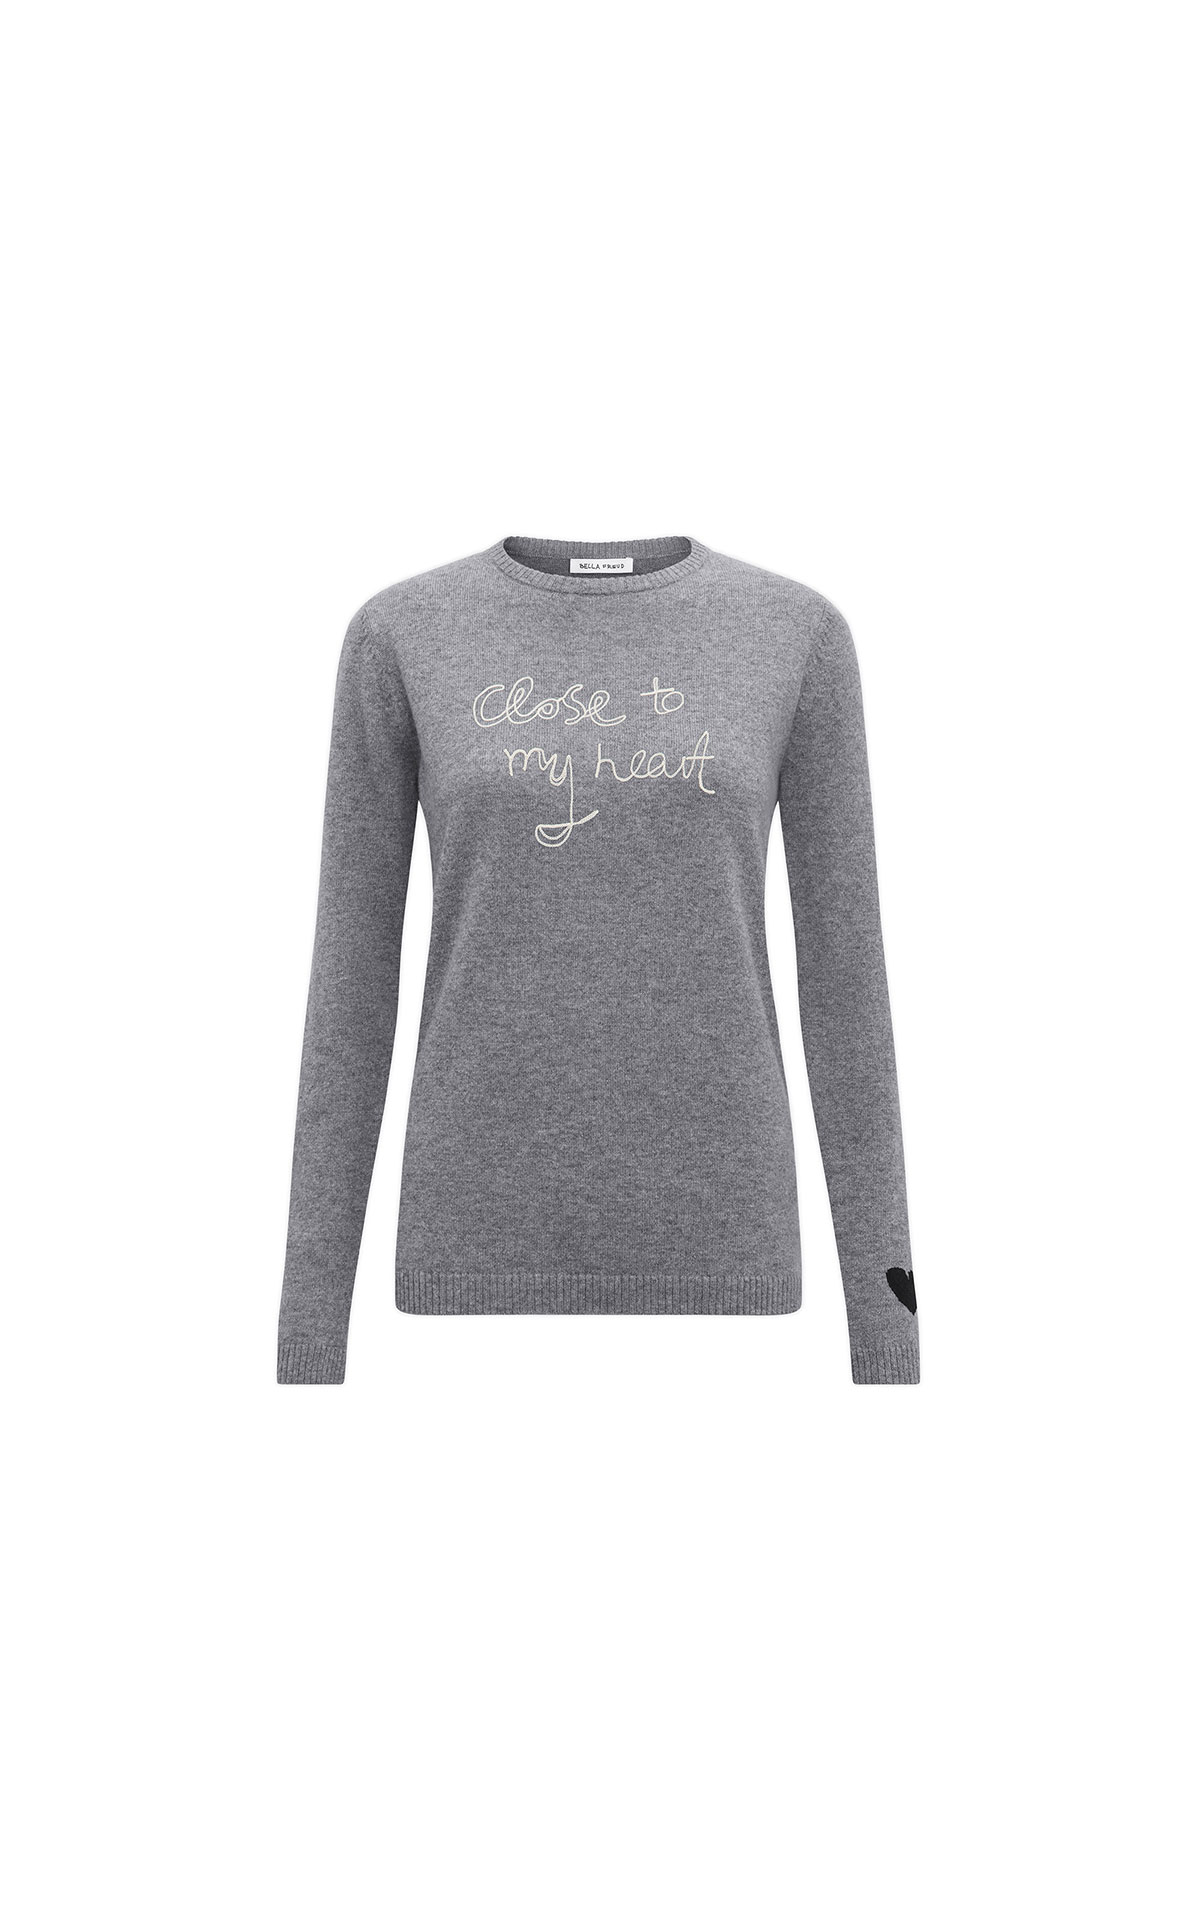 Bella Freud Close to my heart cashmere jumper from Bicester Village